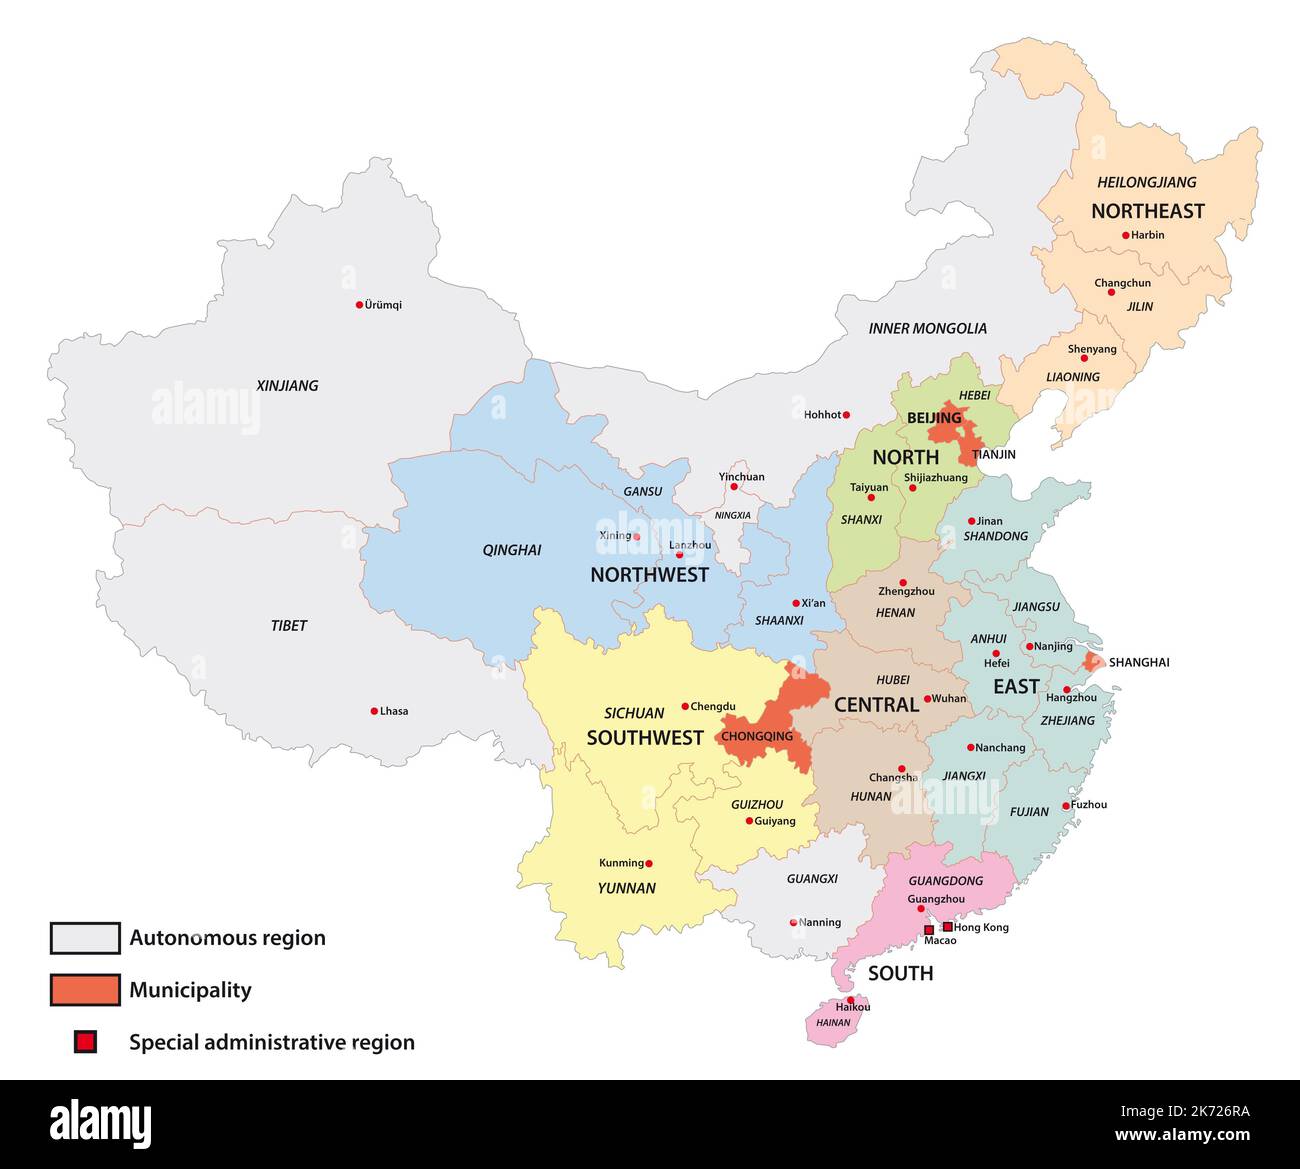 Vector map of county level administrative divisions of China Stock Photo